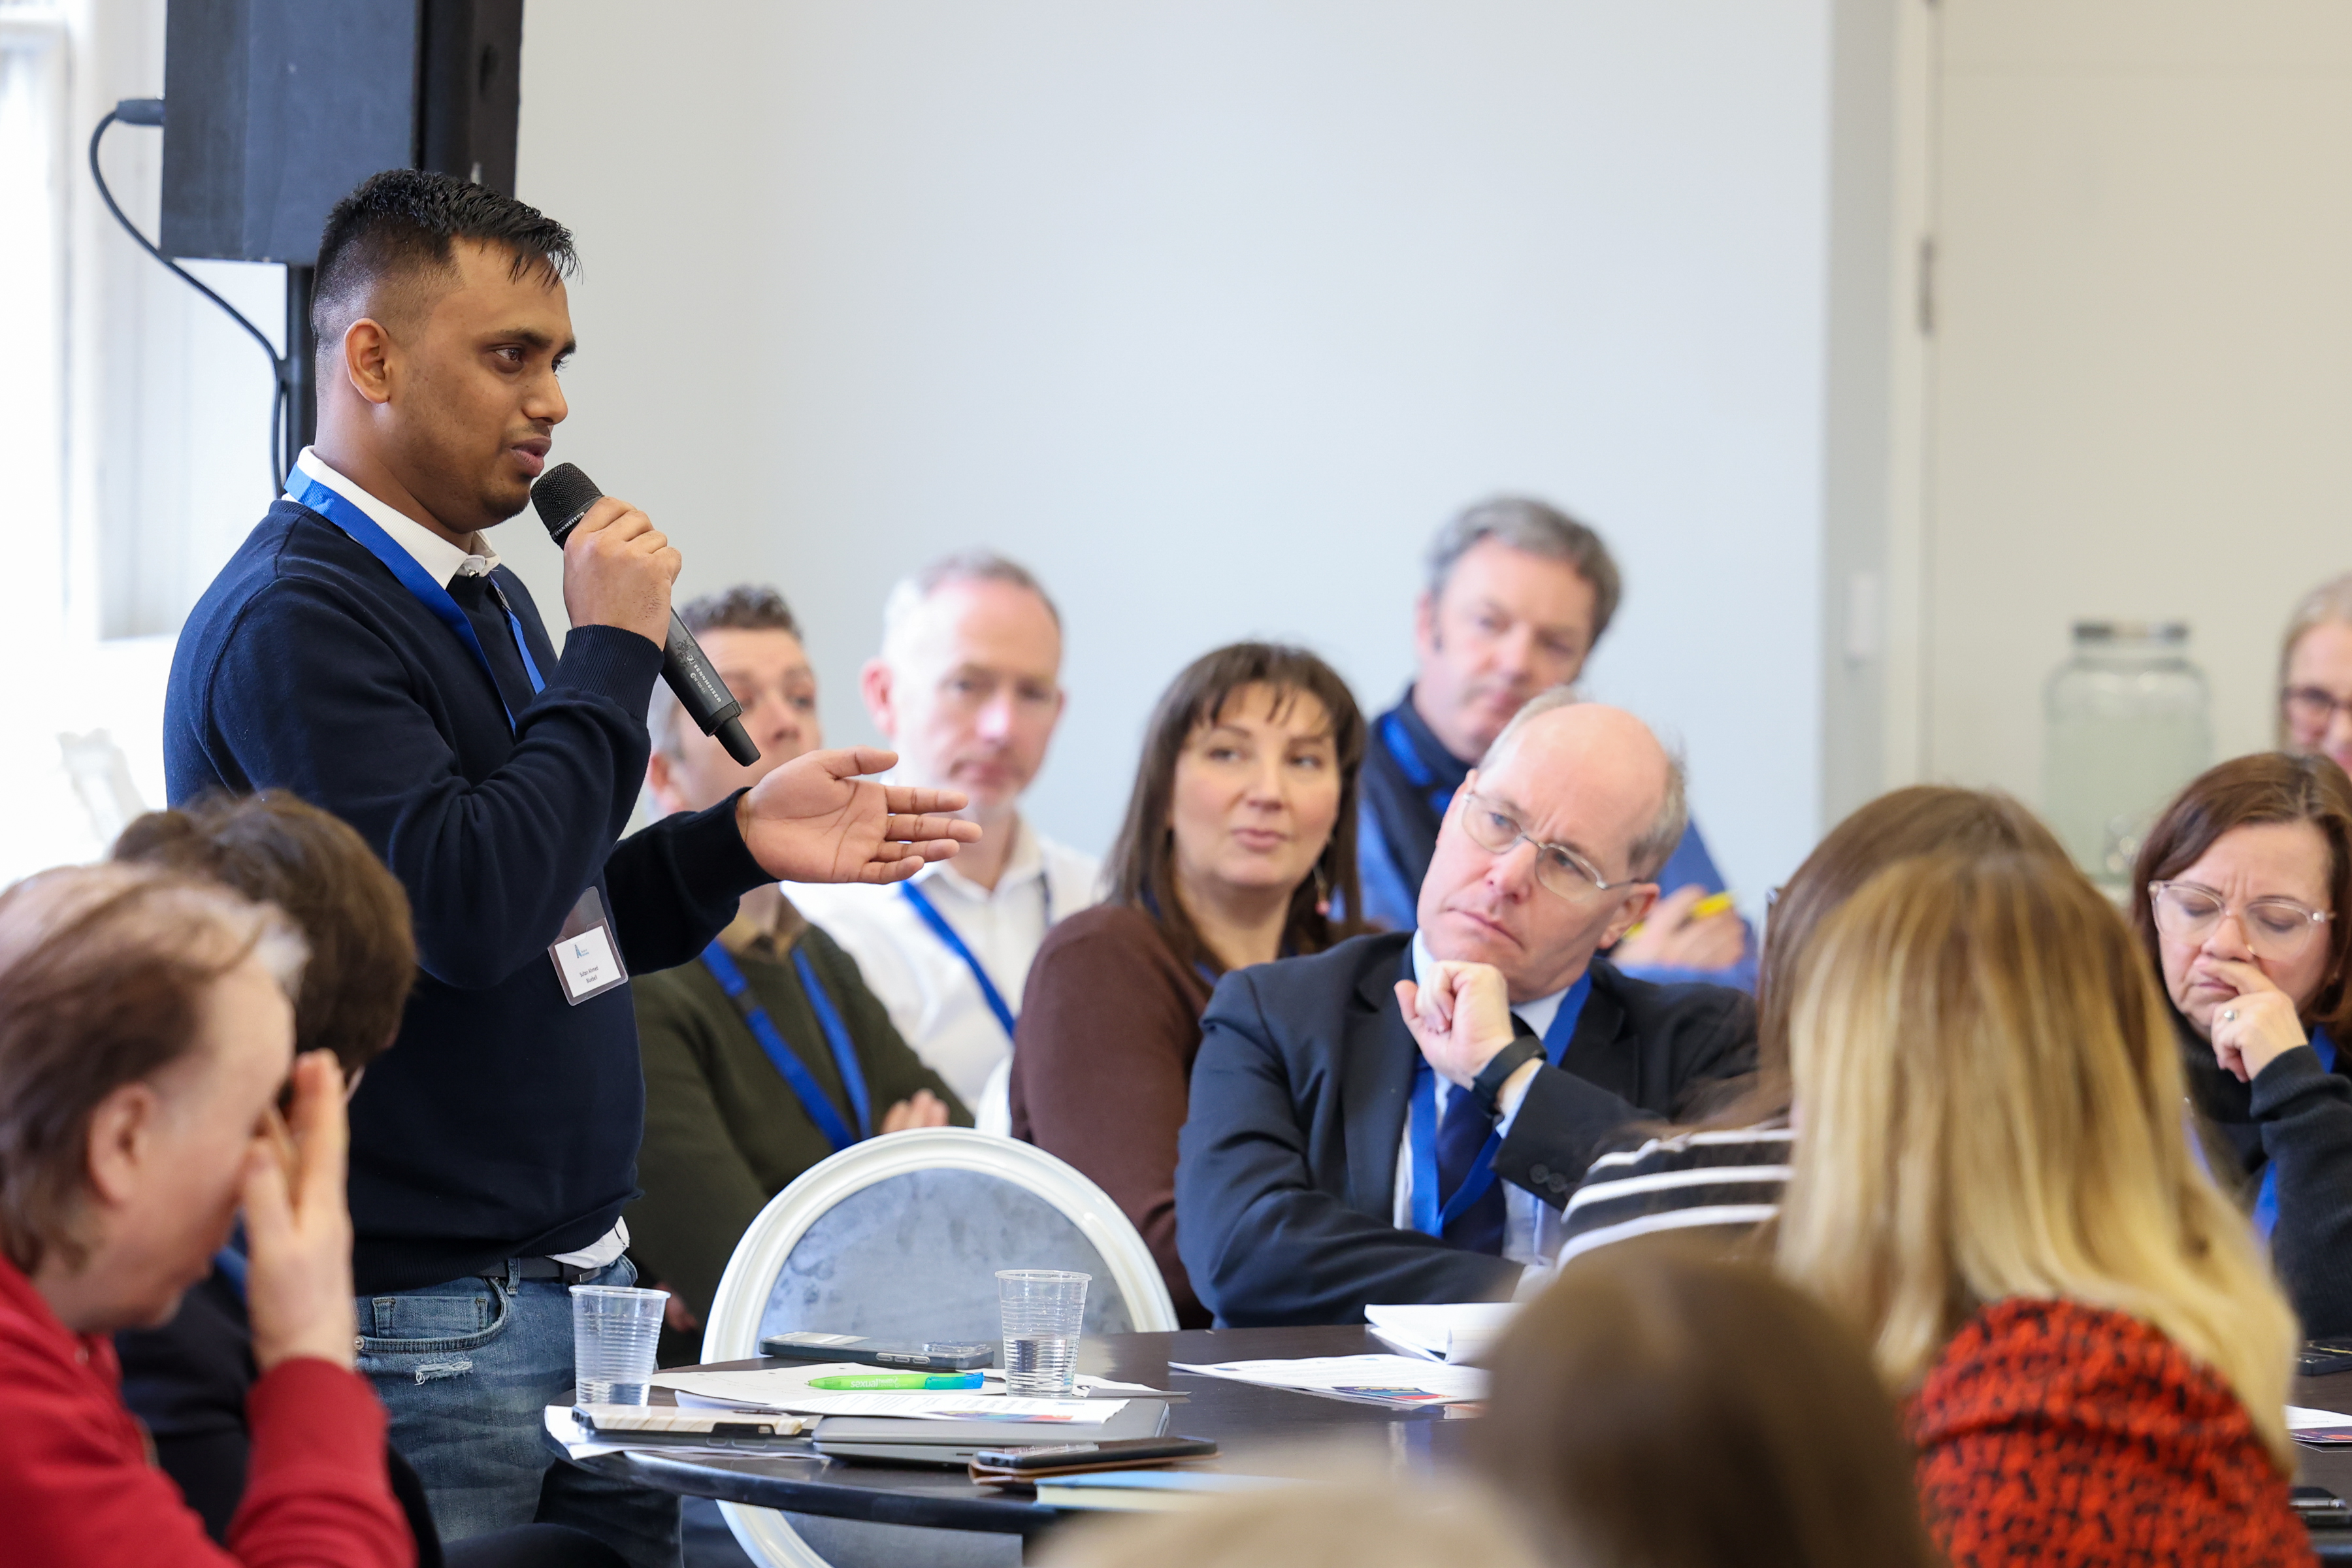 Adult learner Sultan Ahmed holding a microphone speaking to an audience at our Who Does It Cost policy discussion on Monday 4 March  